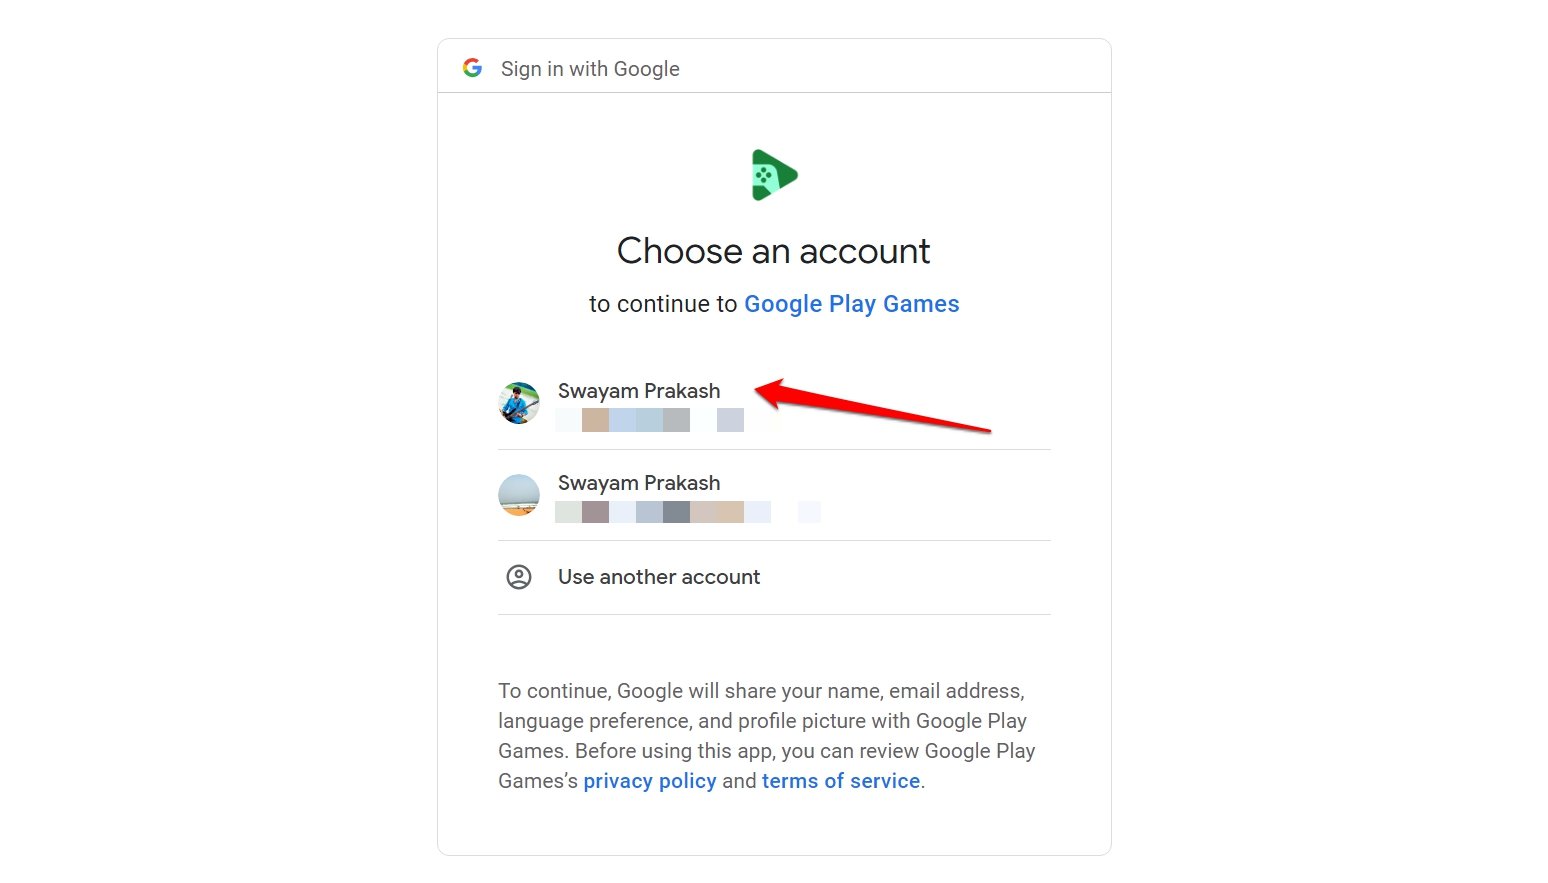 choose-an-account-to-sign-into-Google-Play-Games